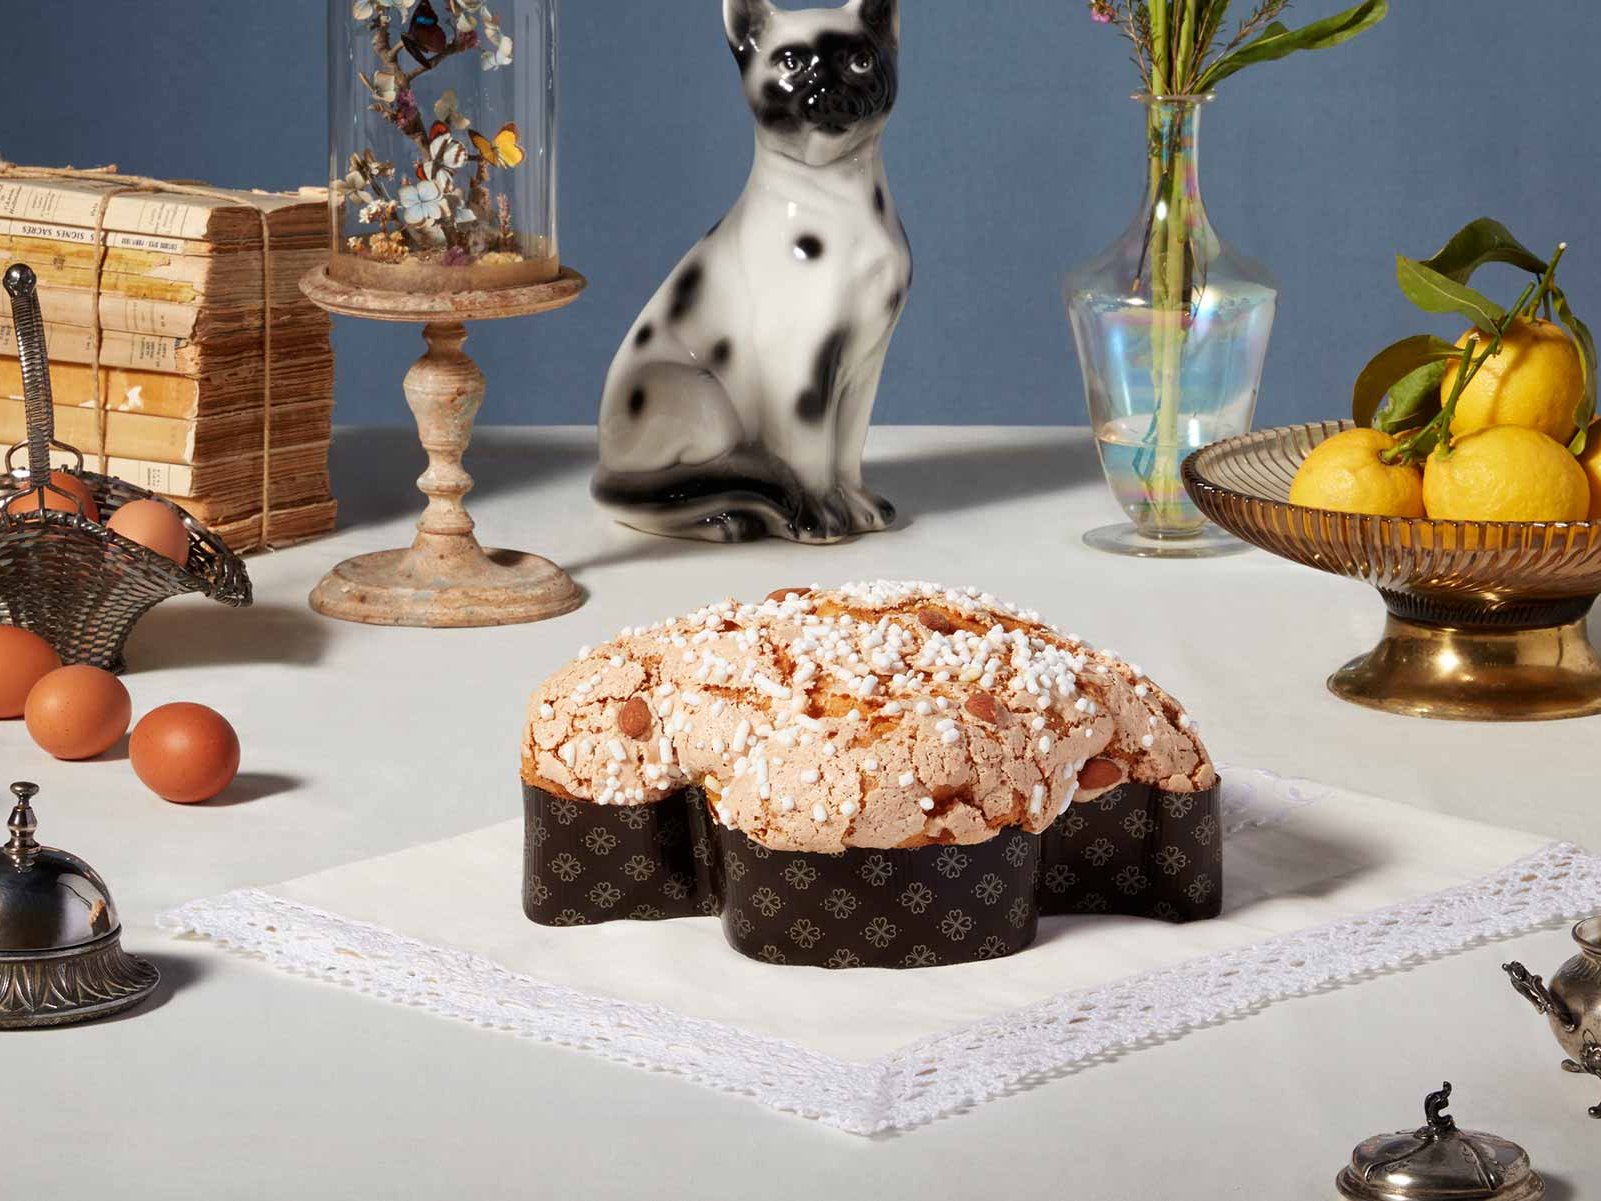 Colomba is a traditional Easter cake.